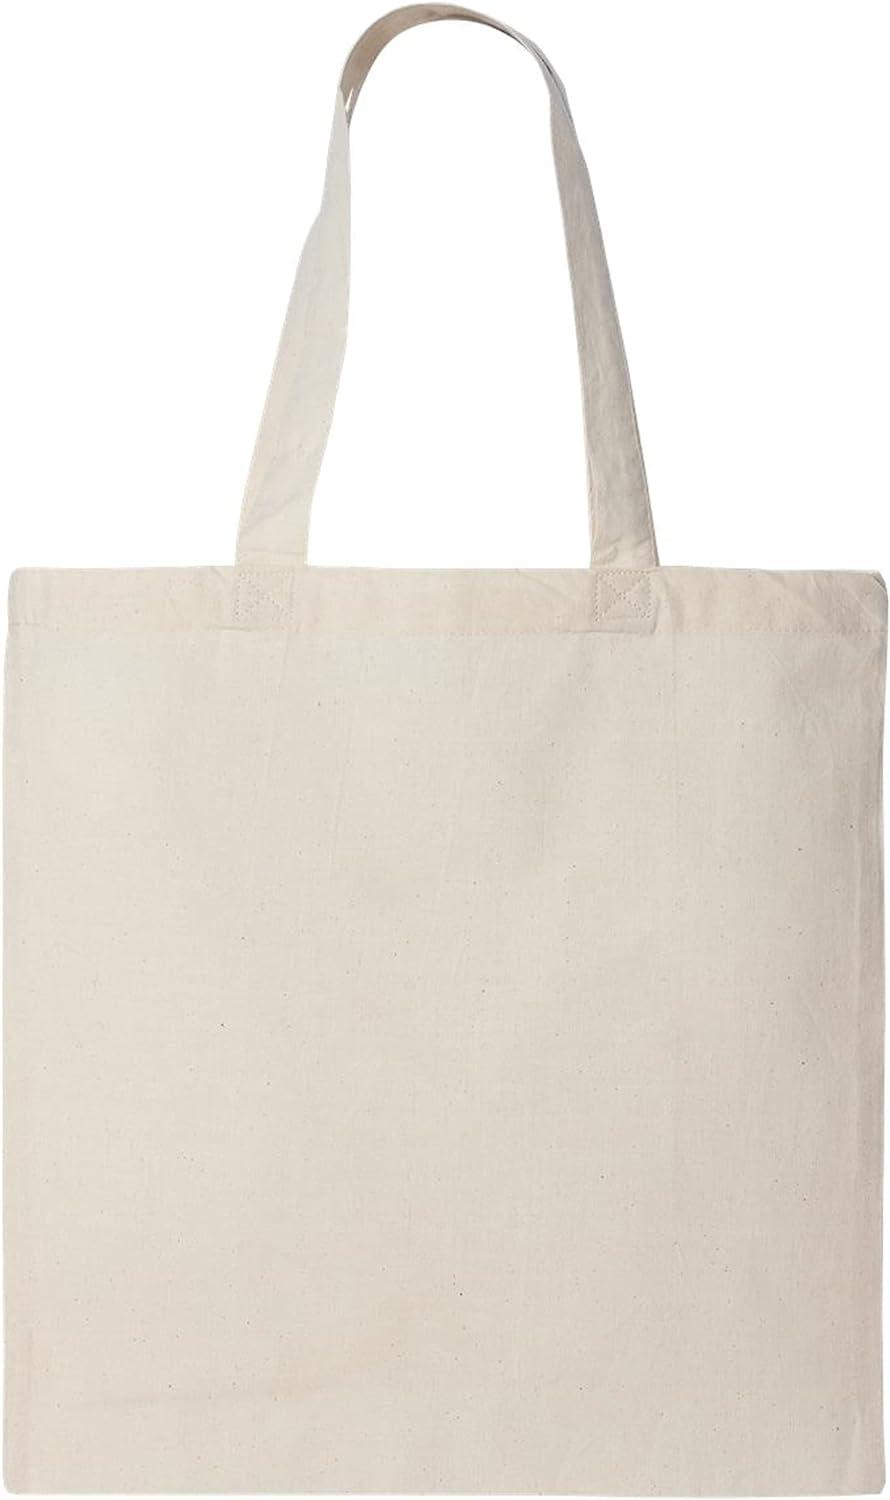 USA Made Blank Canvas Tote Bags Sturdy Cotton Canvas Totebags, Strong  Canvas Bags Plain Arts and Crafts Totes, Reusable Grocery Shopping 